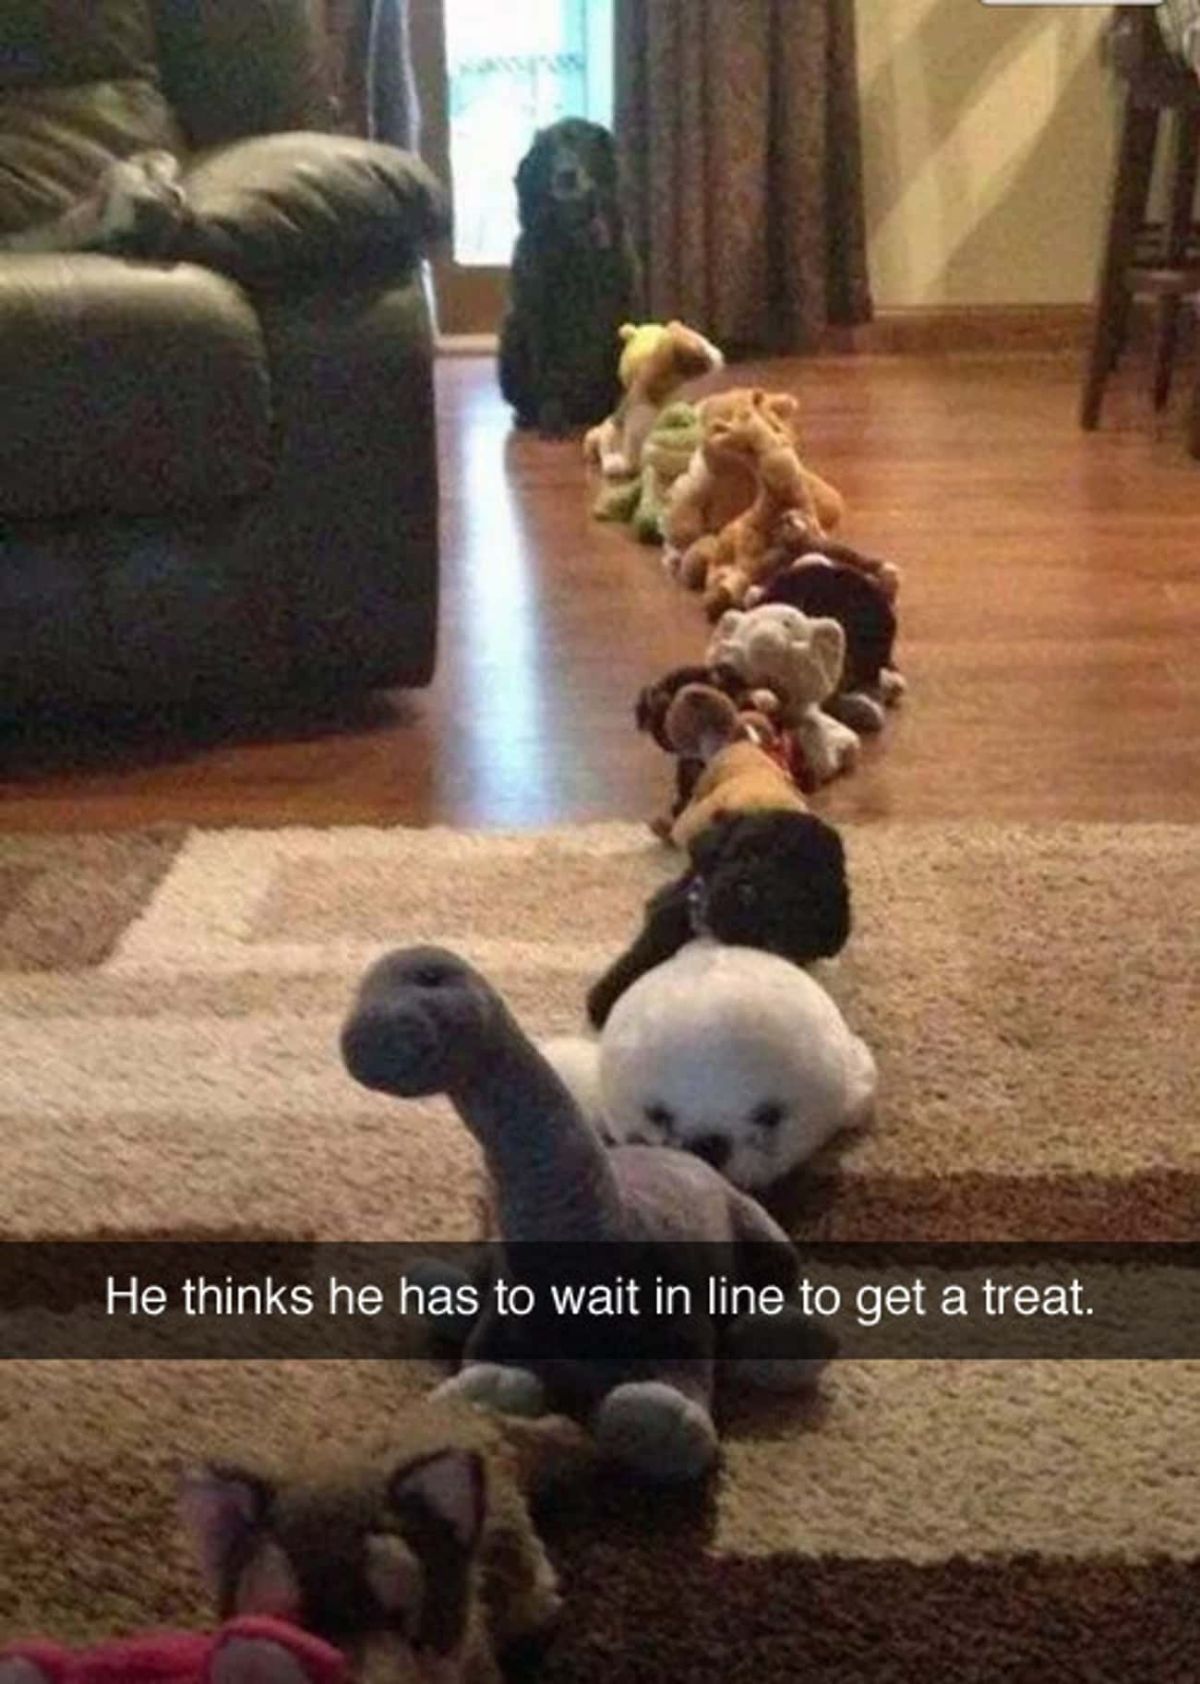 black dog sitting on the floor behind a line of stuffed toys with the caption He thinks he has to wait in line to get a treat